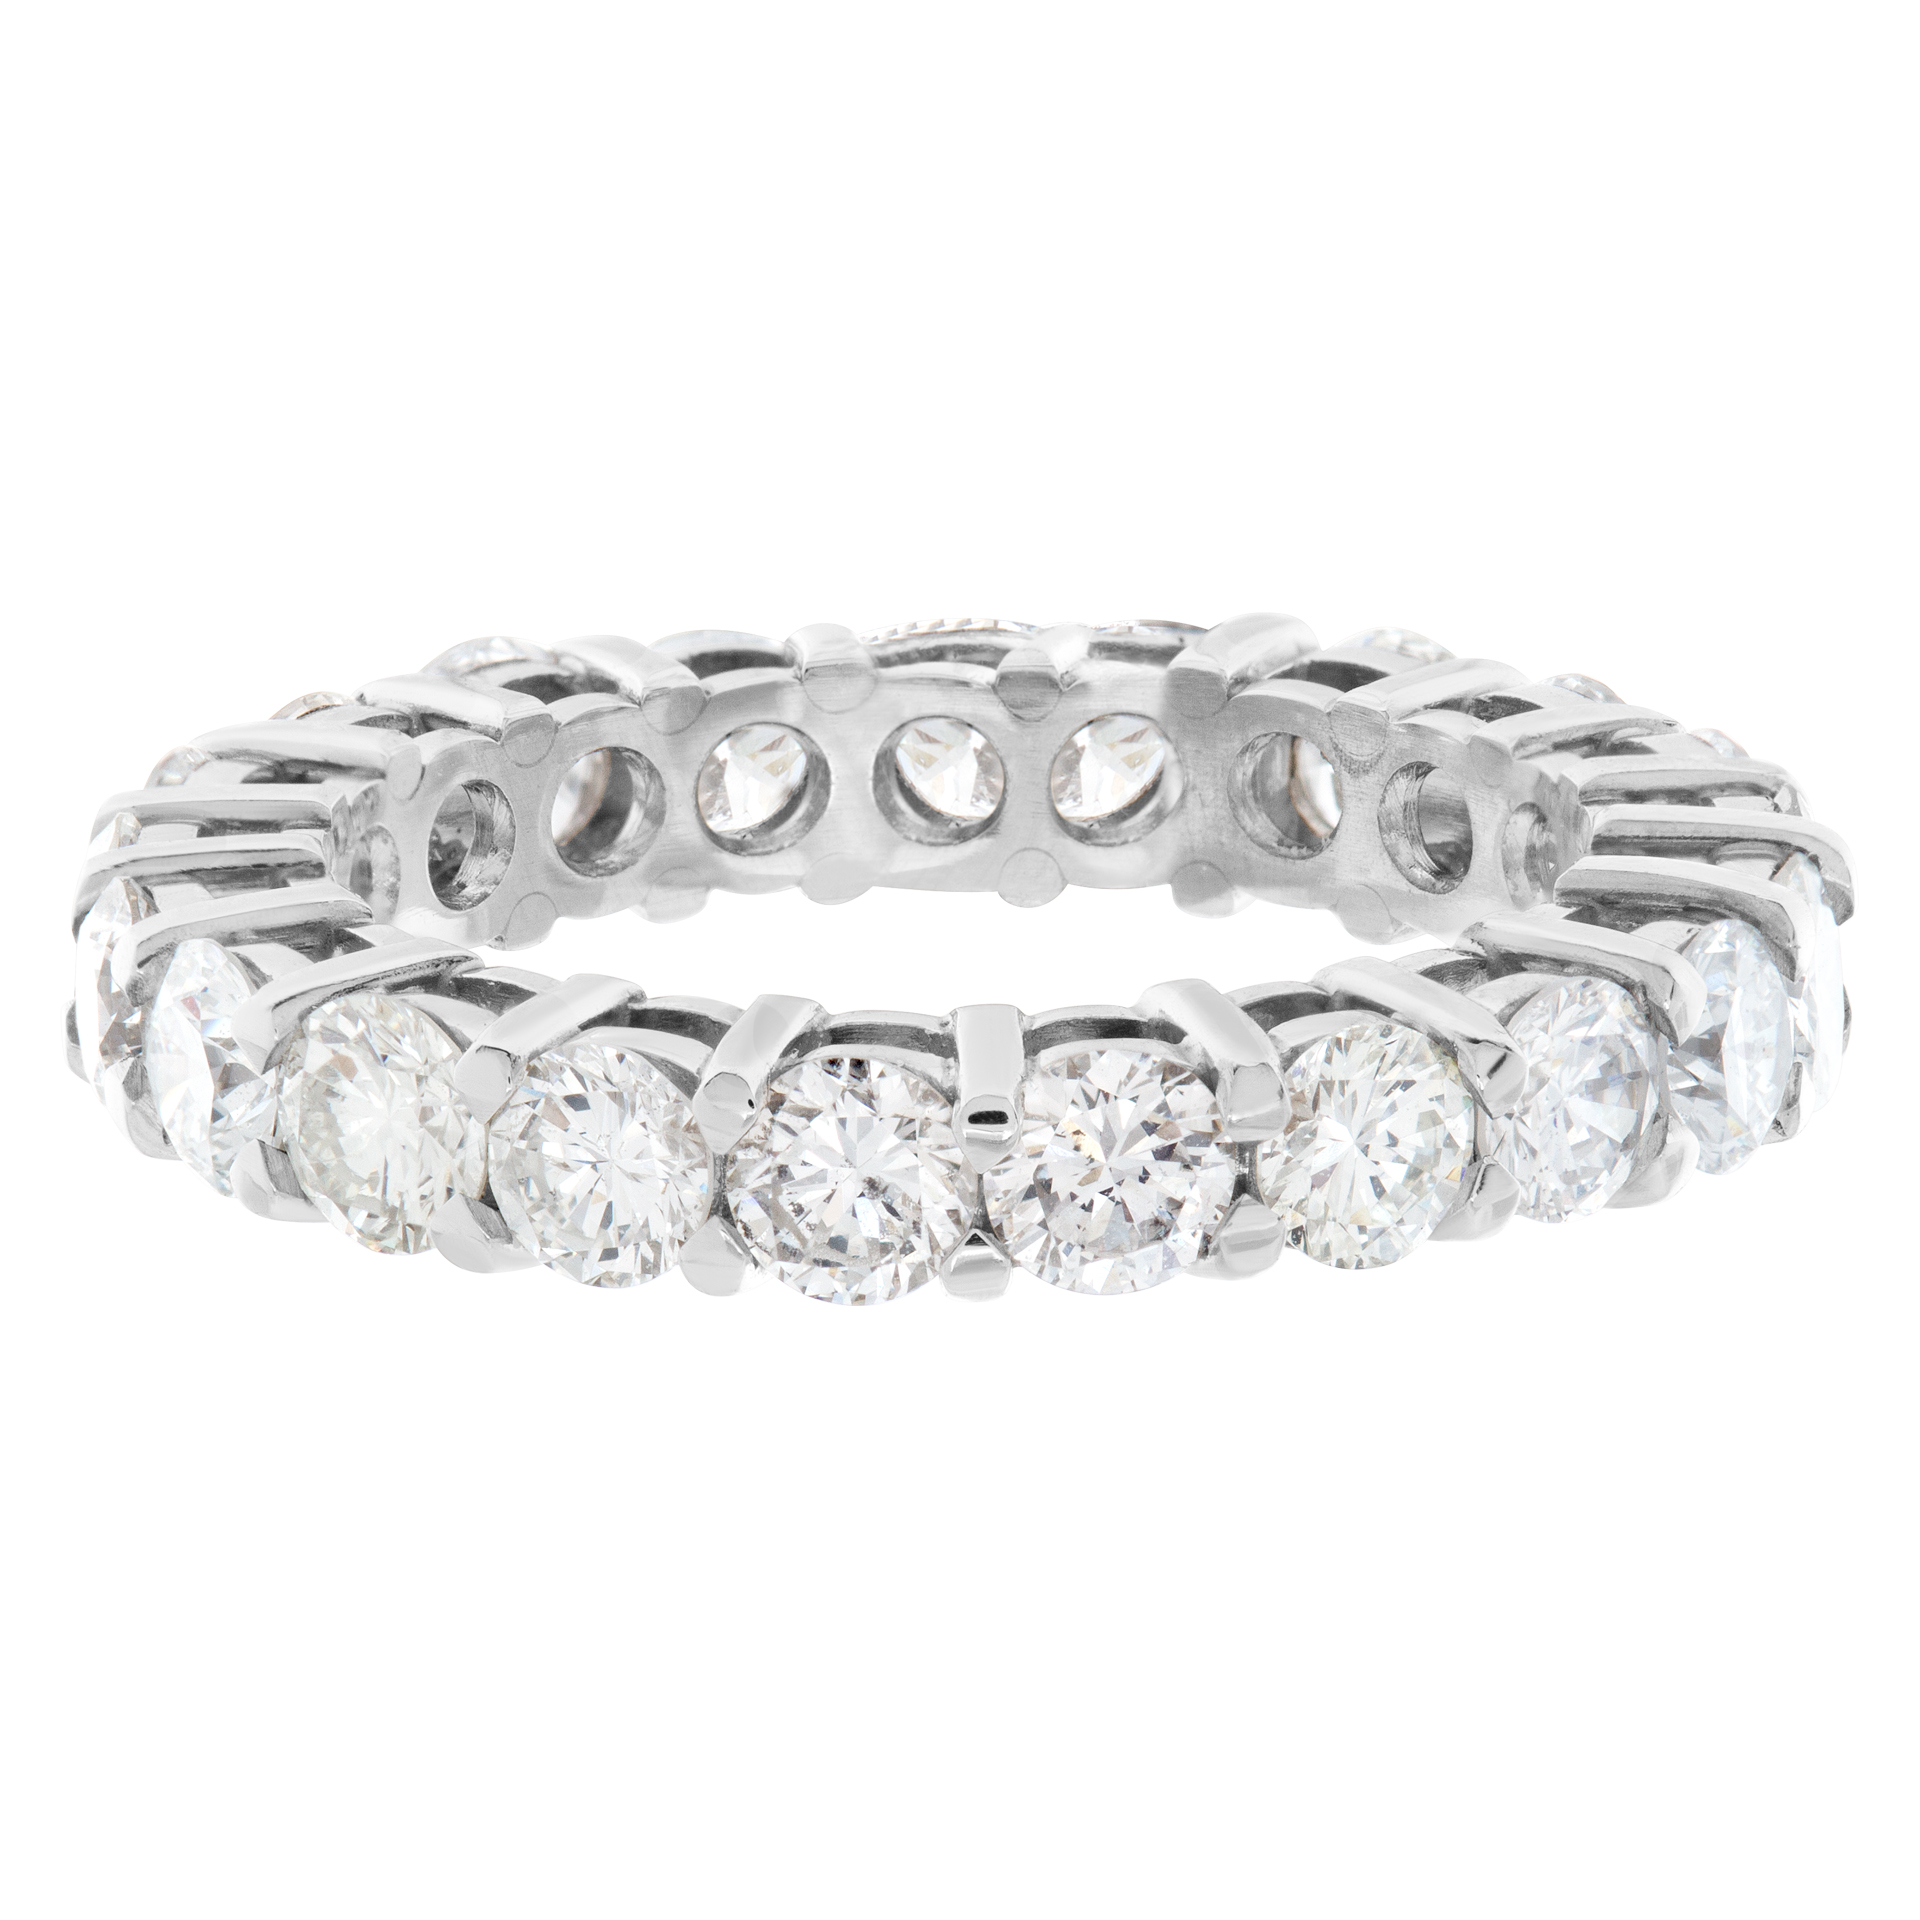 Diamond eternity band in platinum with 2.72 carats in diamonds